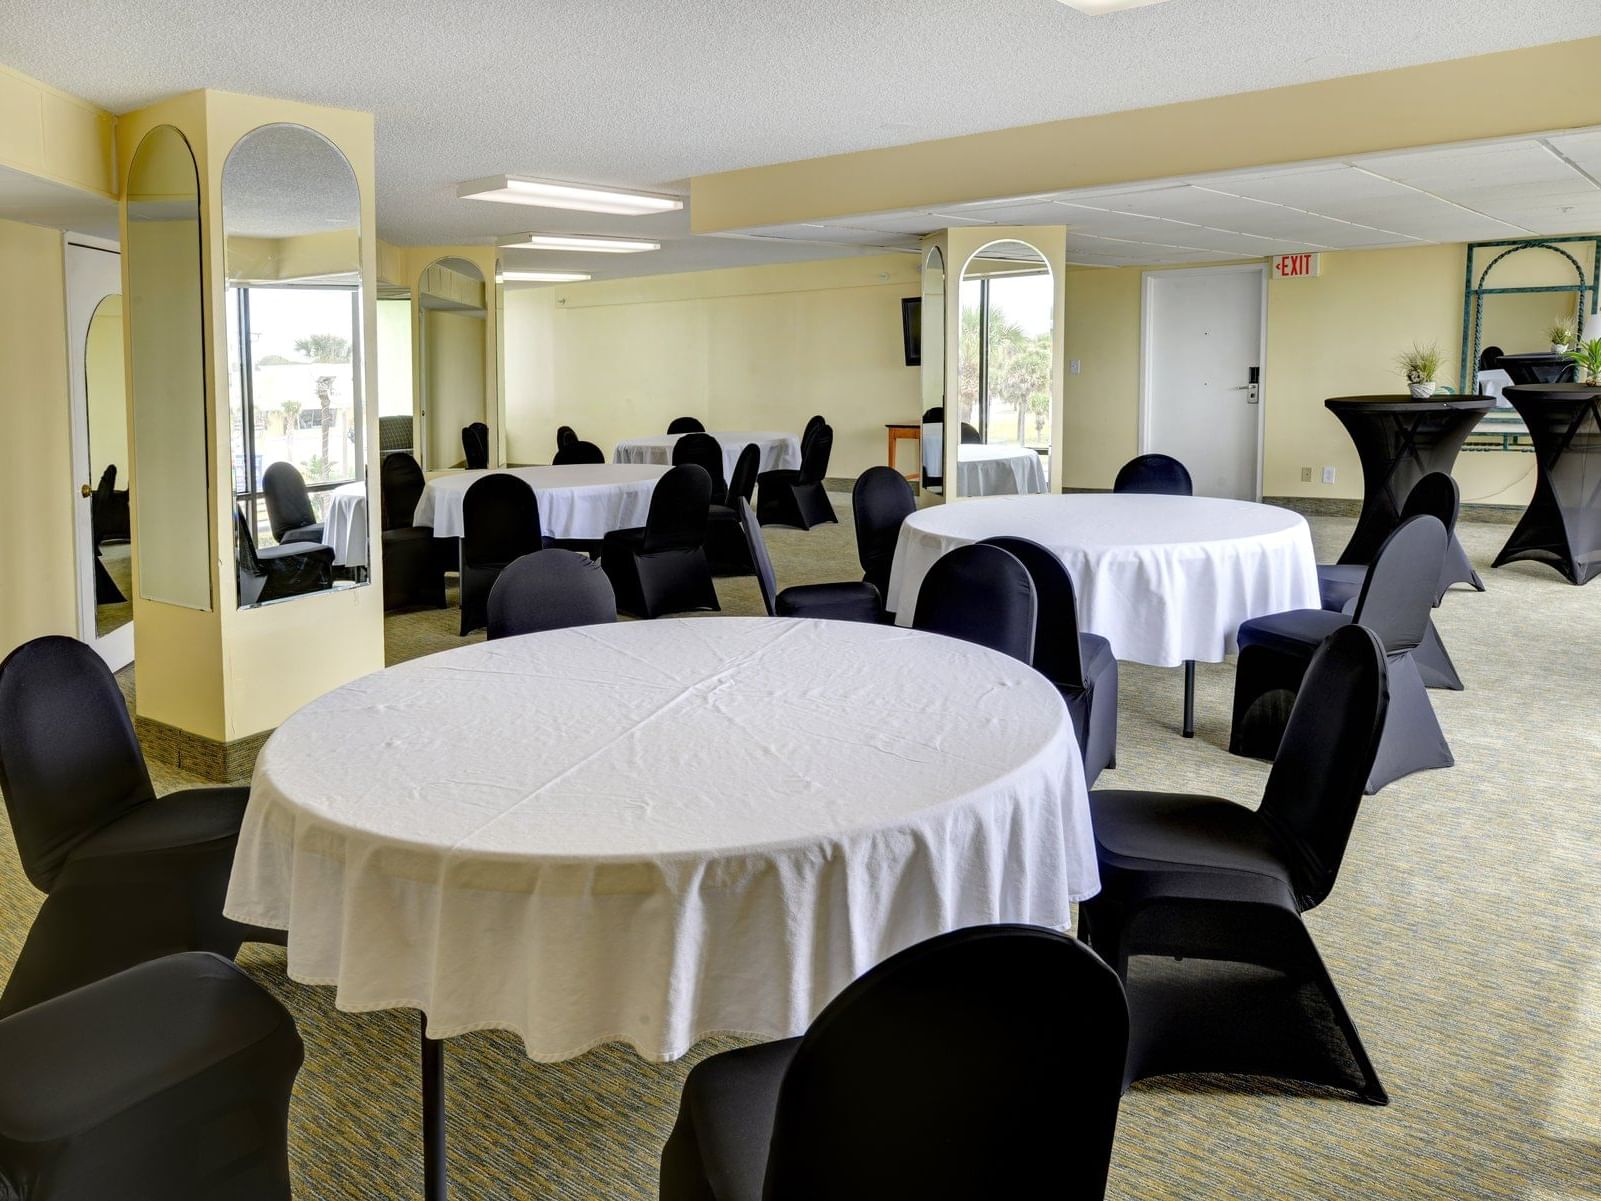 Meeting room with round conference tables.